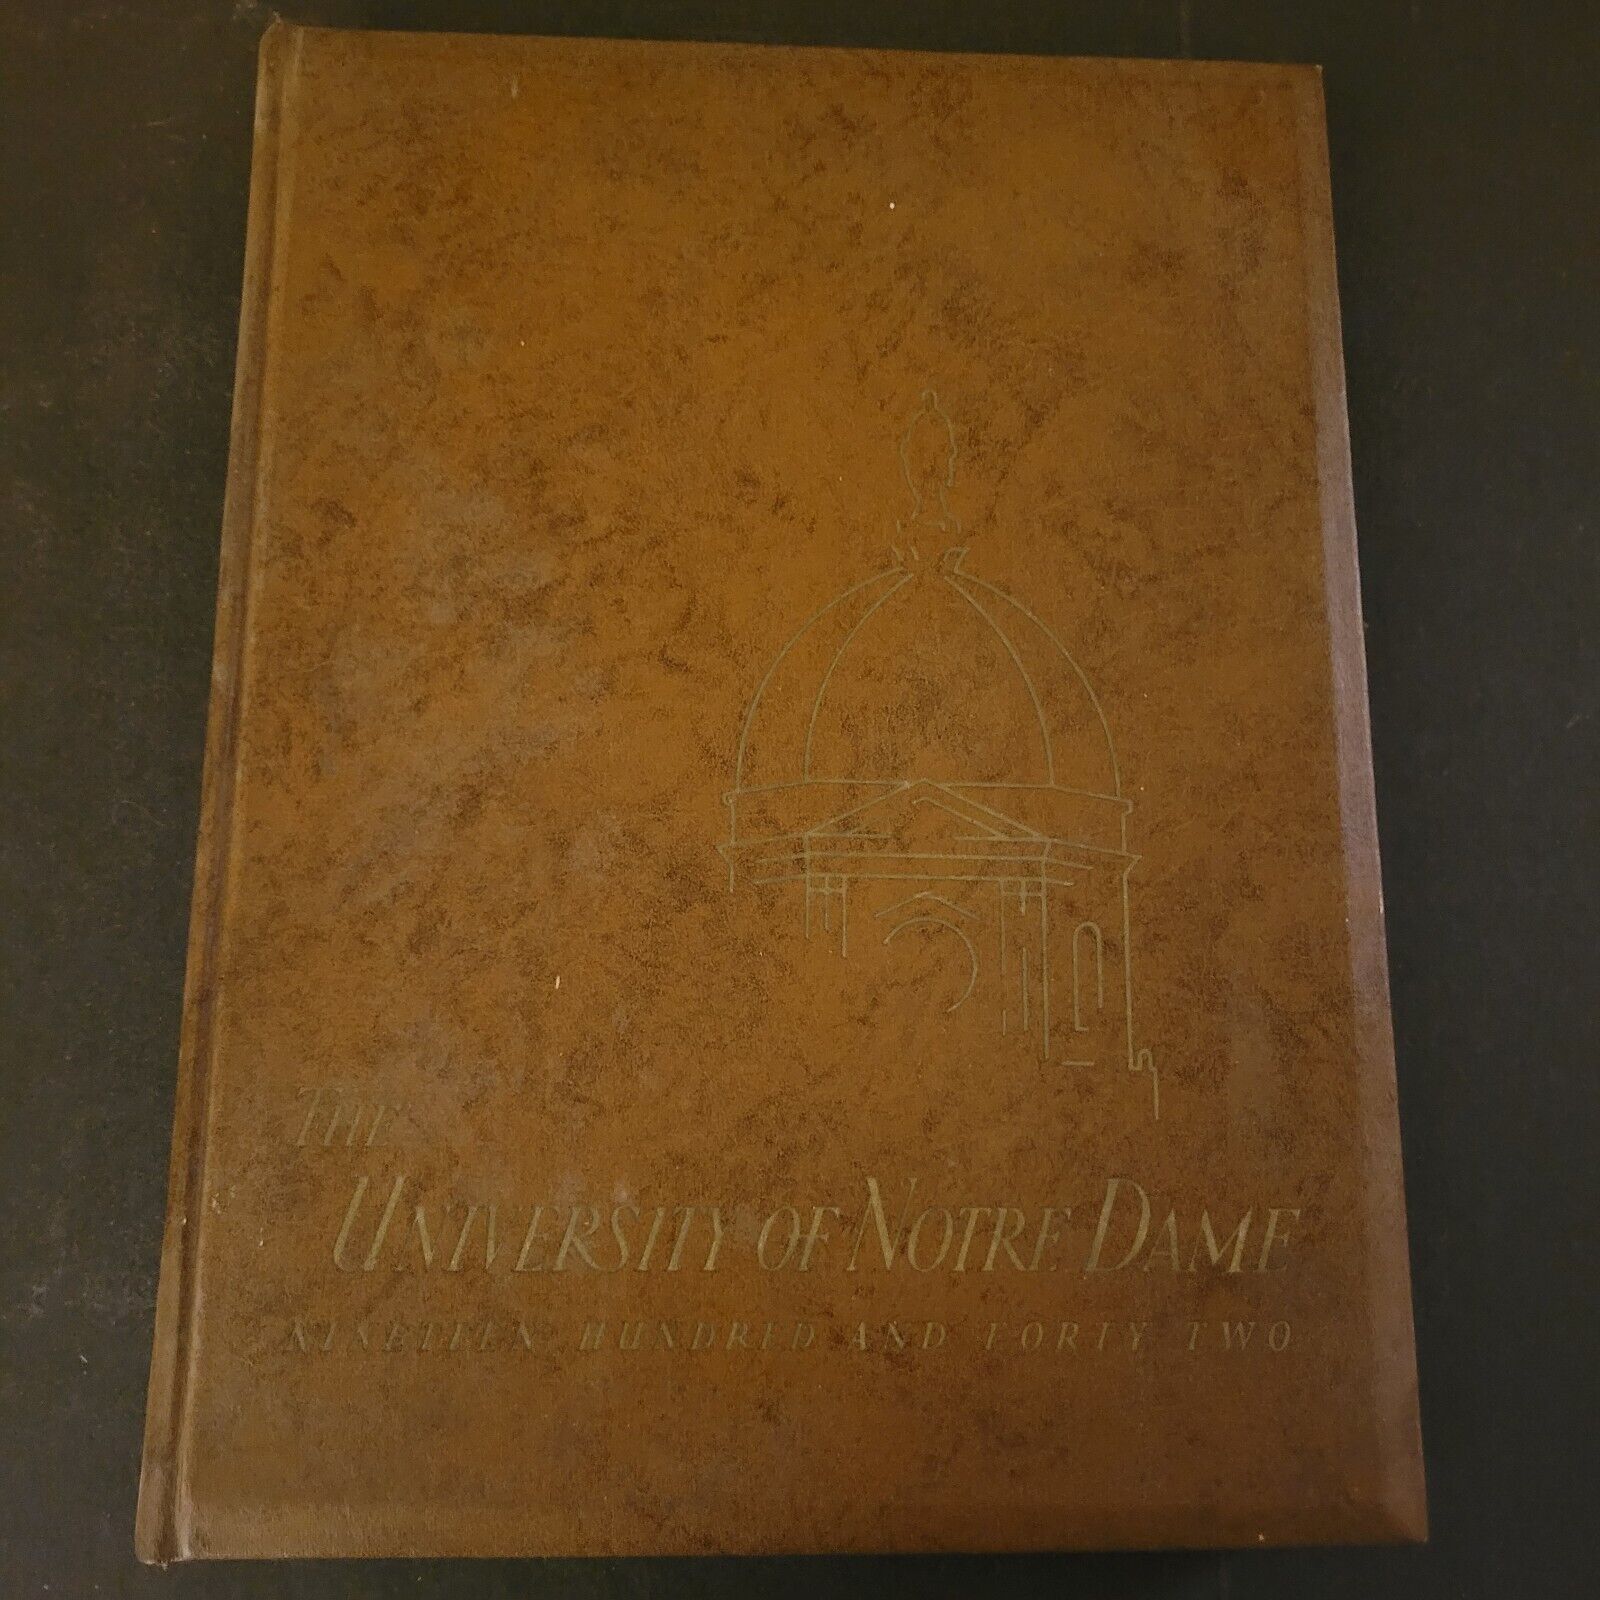 1942 University of Notre Dame Yearbook THE DOME Vol. 36 - Angelo Bertelli, Leahy